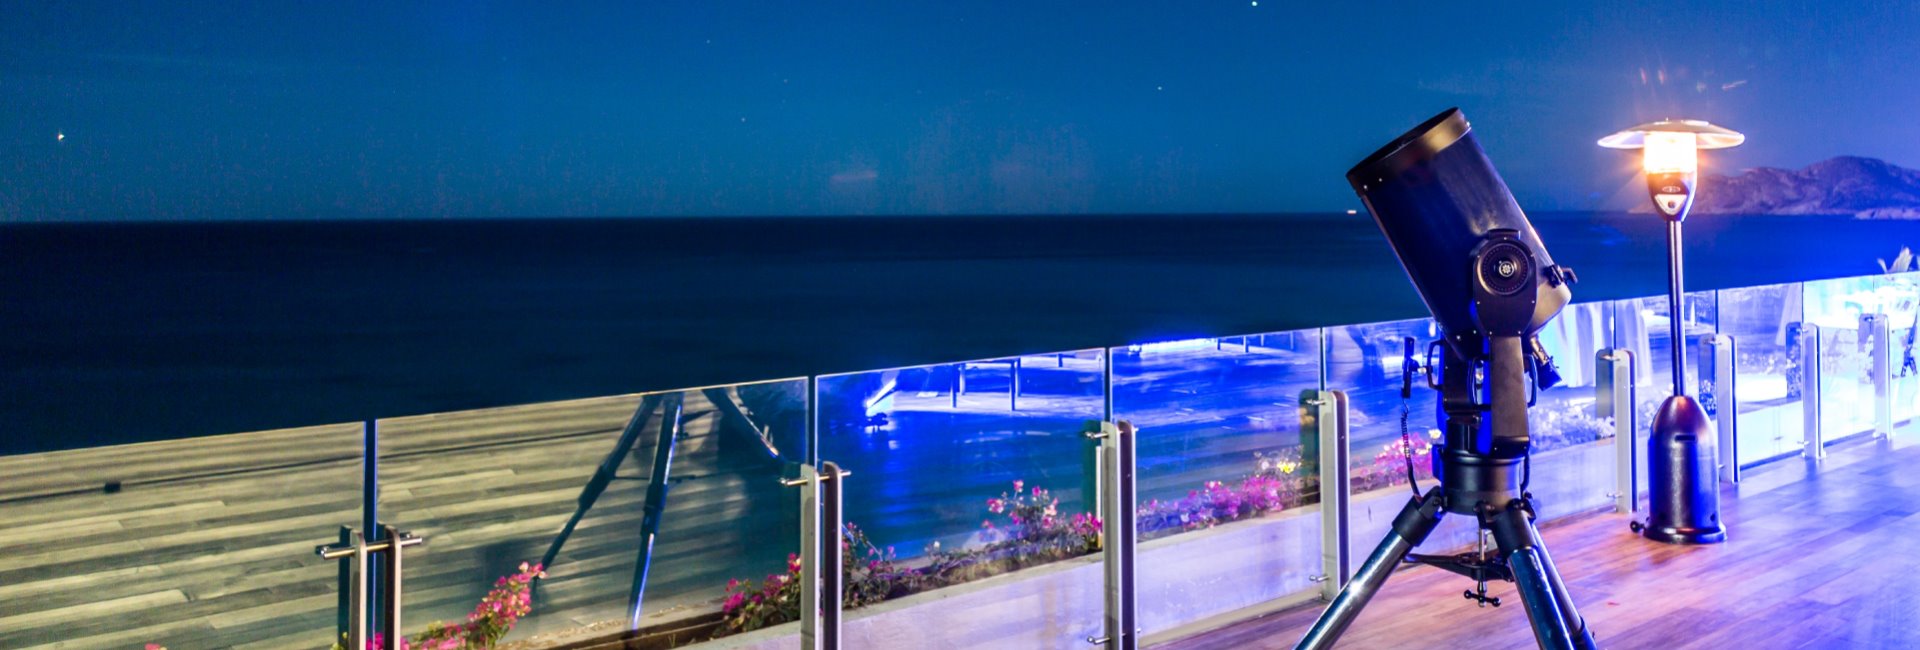 Stargazing Package at Grand Velas Los Cabos, Mexico